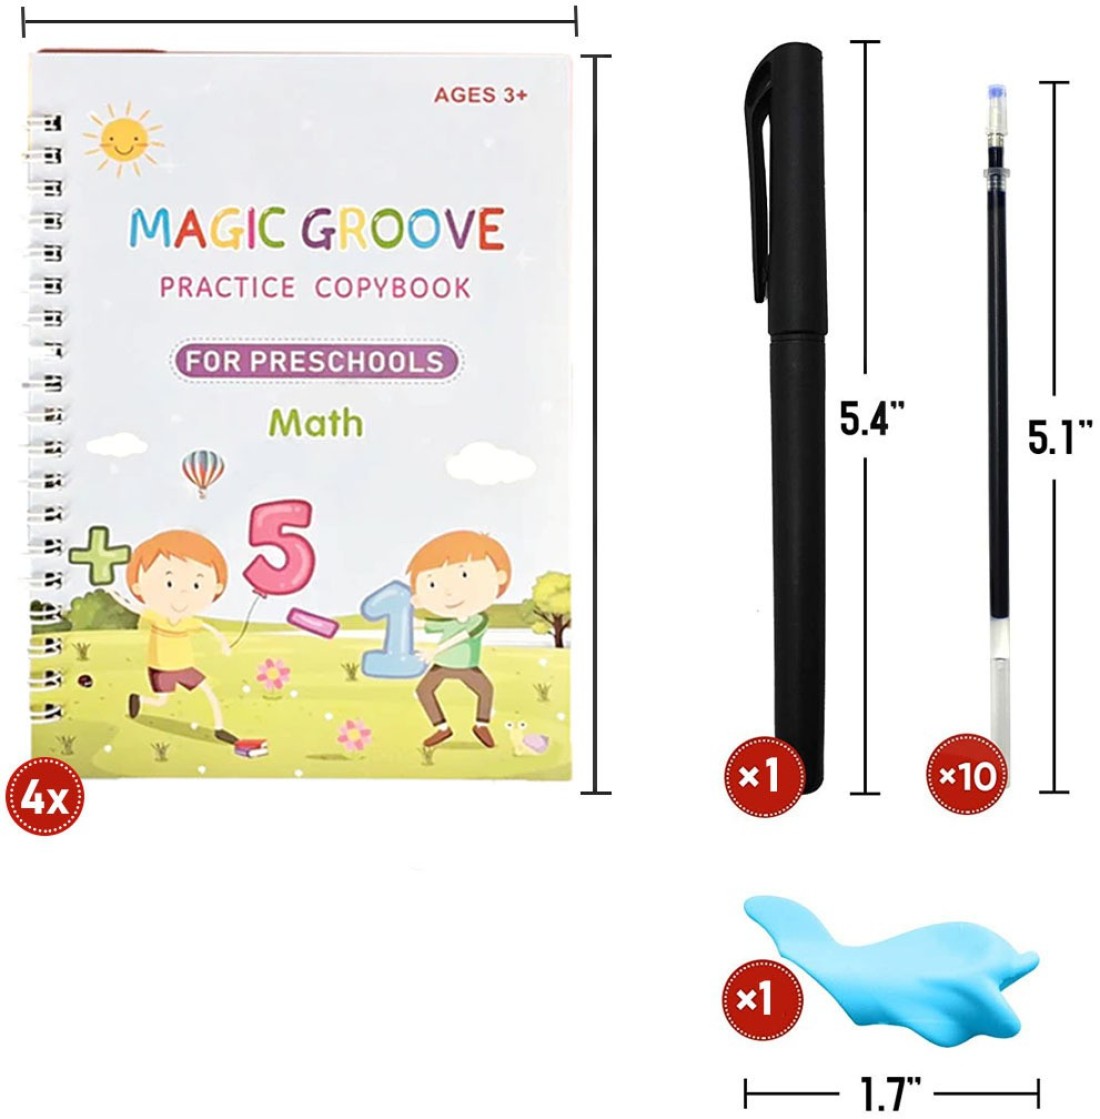 Set of 4 Sank Magic Learning Book with Magic Pen , Practice book For  Montessori children Tracing Handwriting, First Learning Books for Kids, Preschool Learning Book for Kids